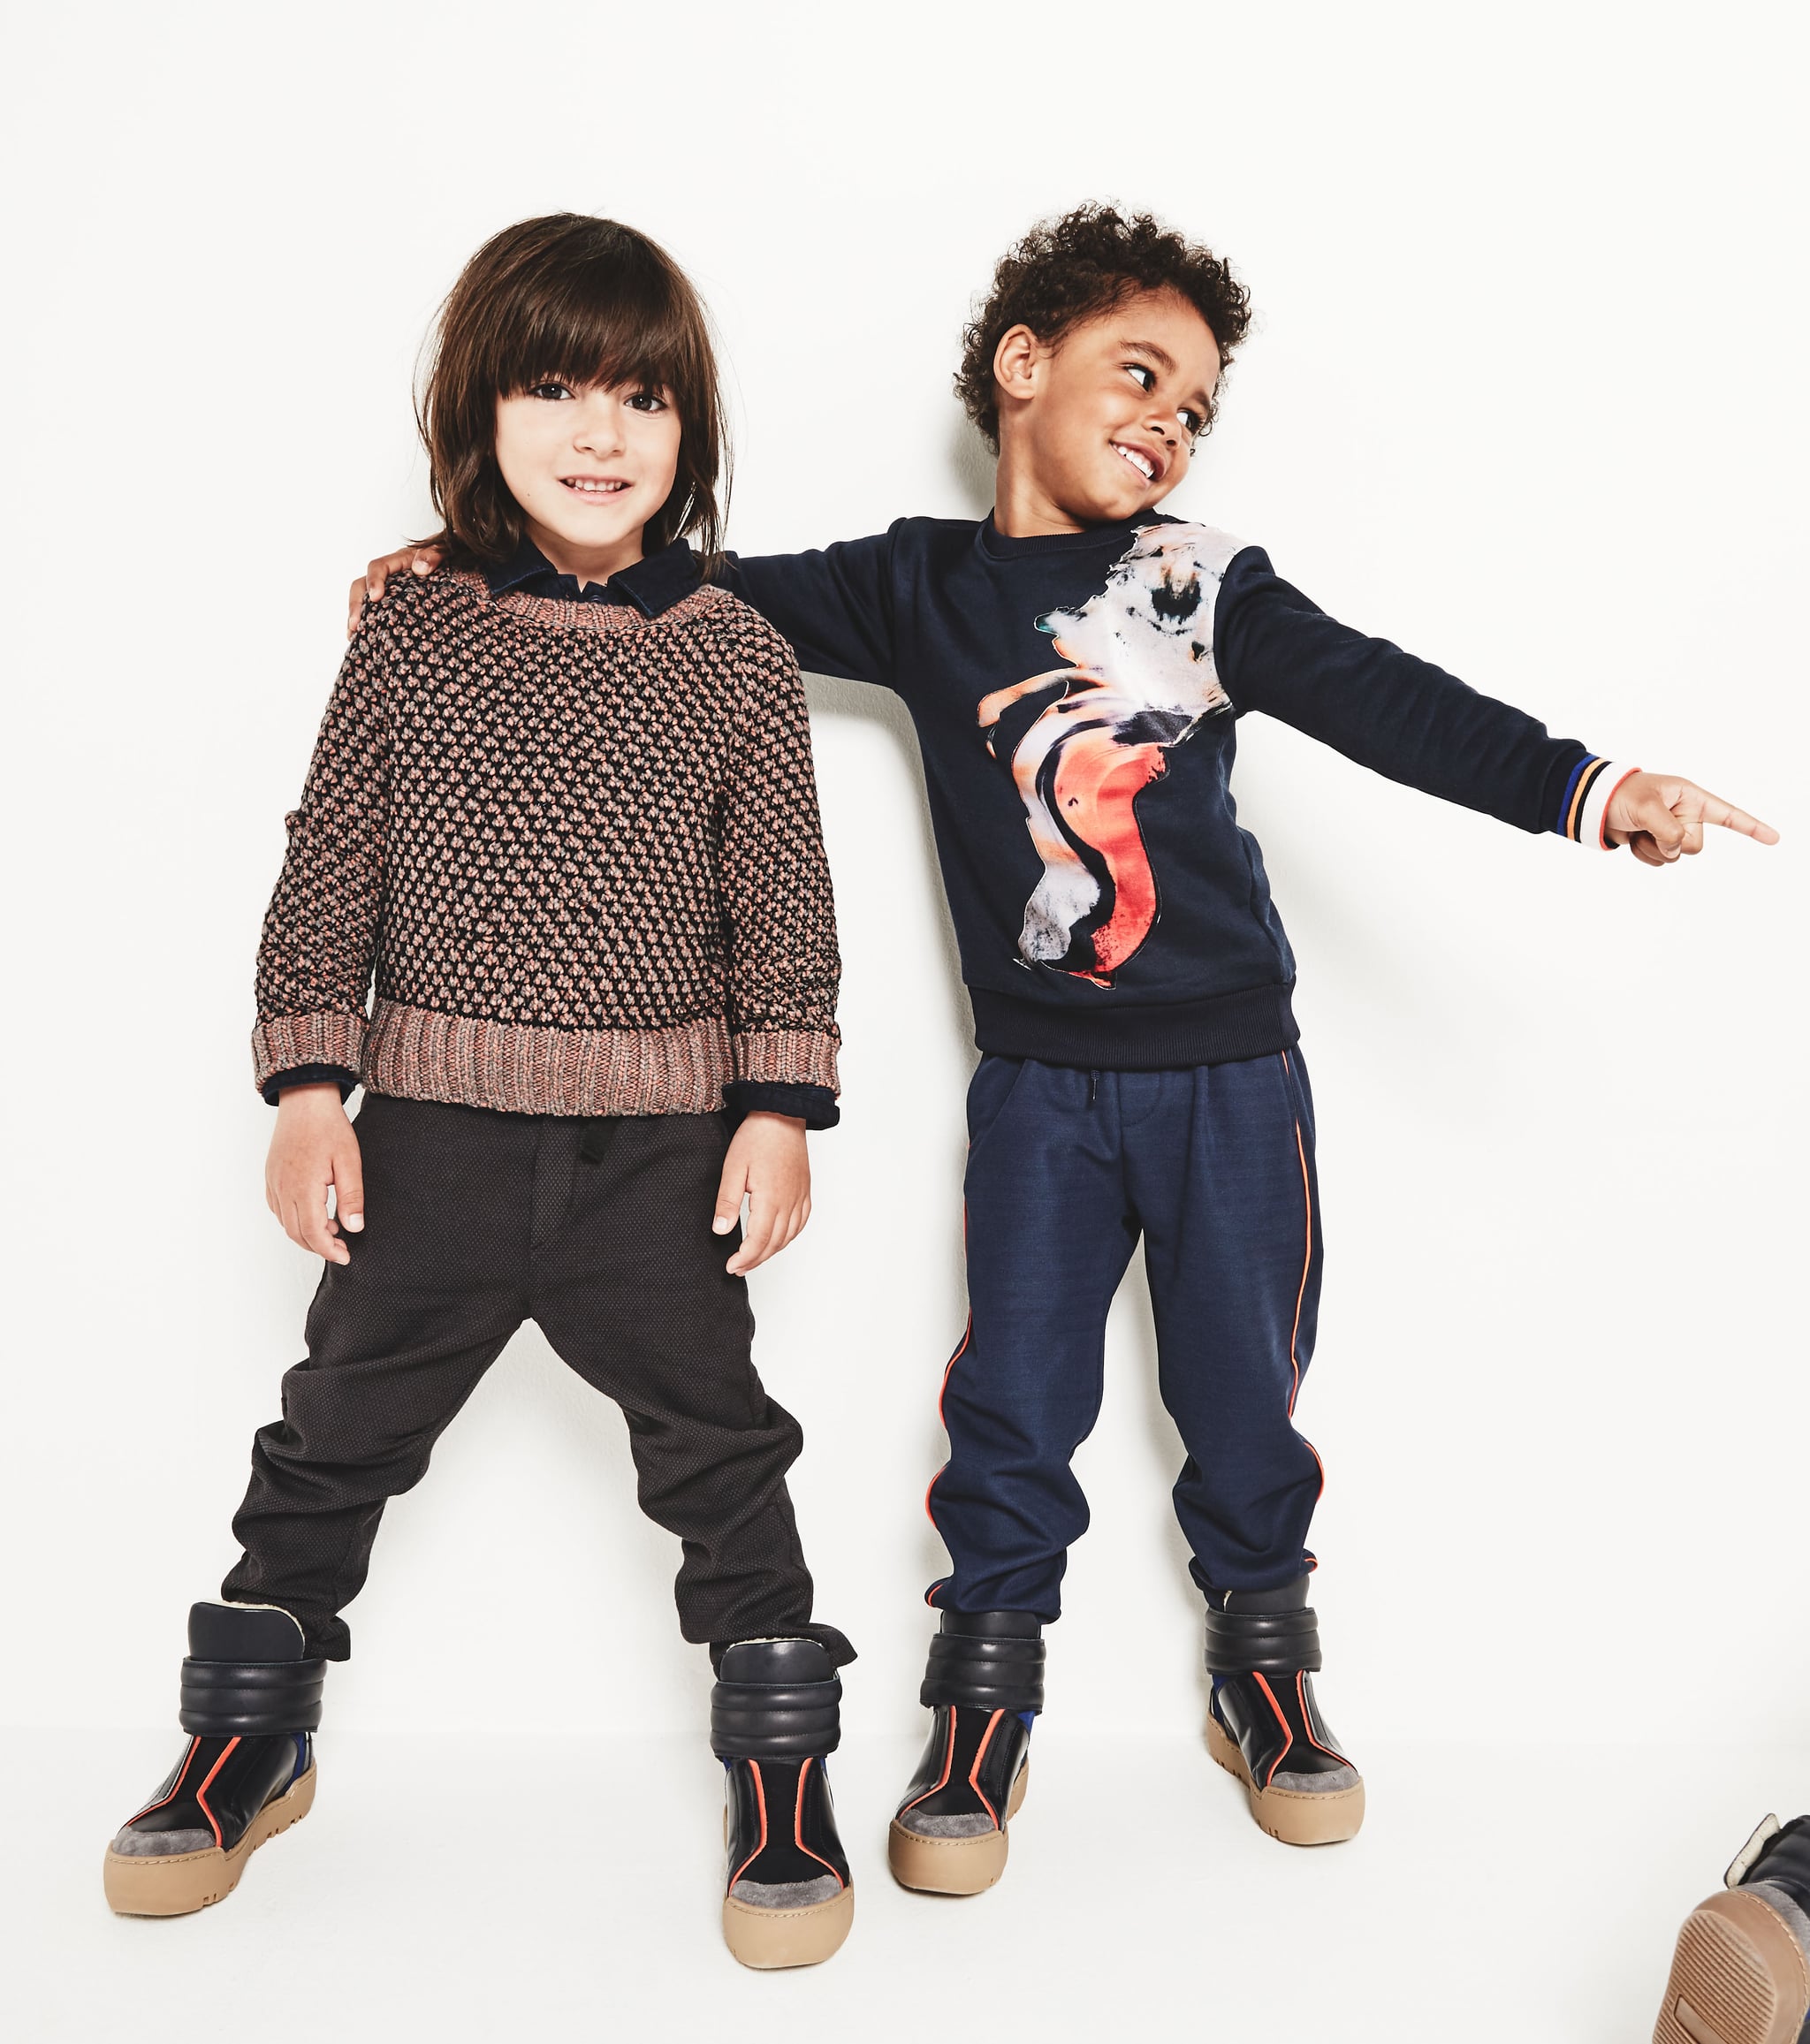 H&M Kids collection to raise funds for WWF - H&M Group